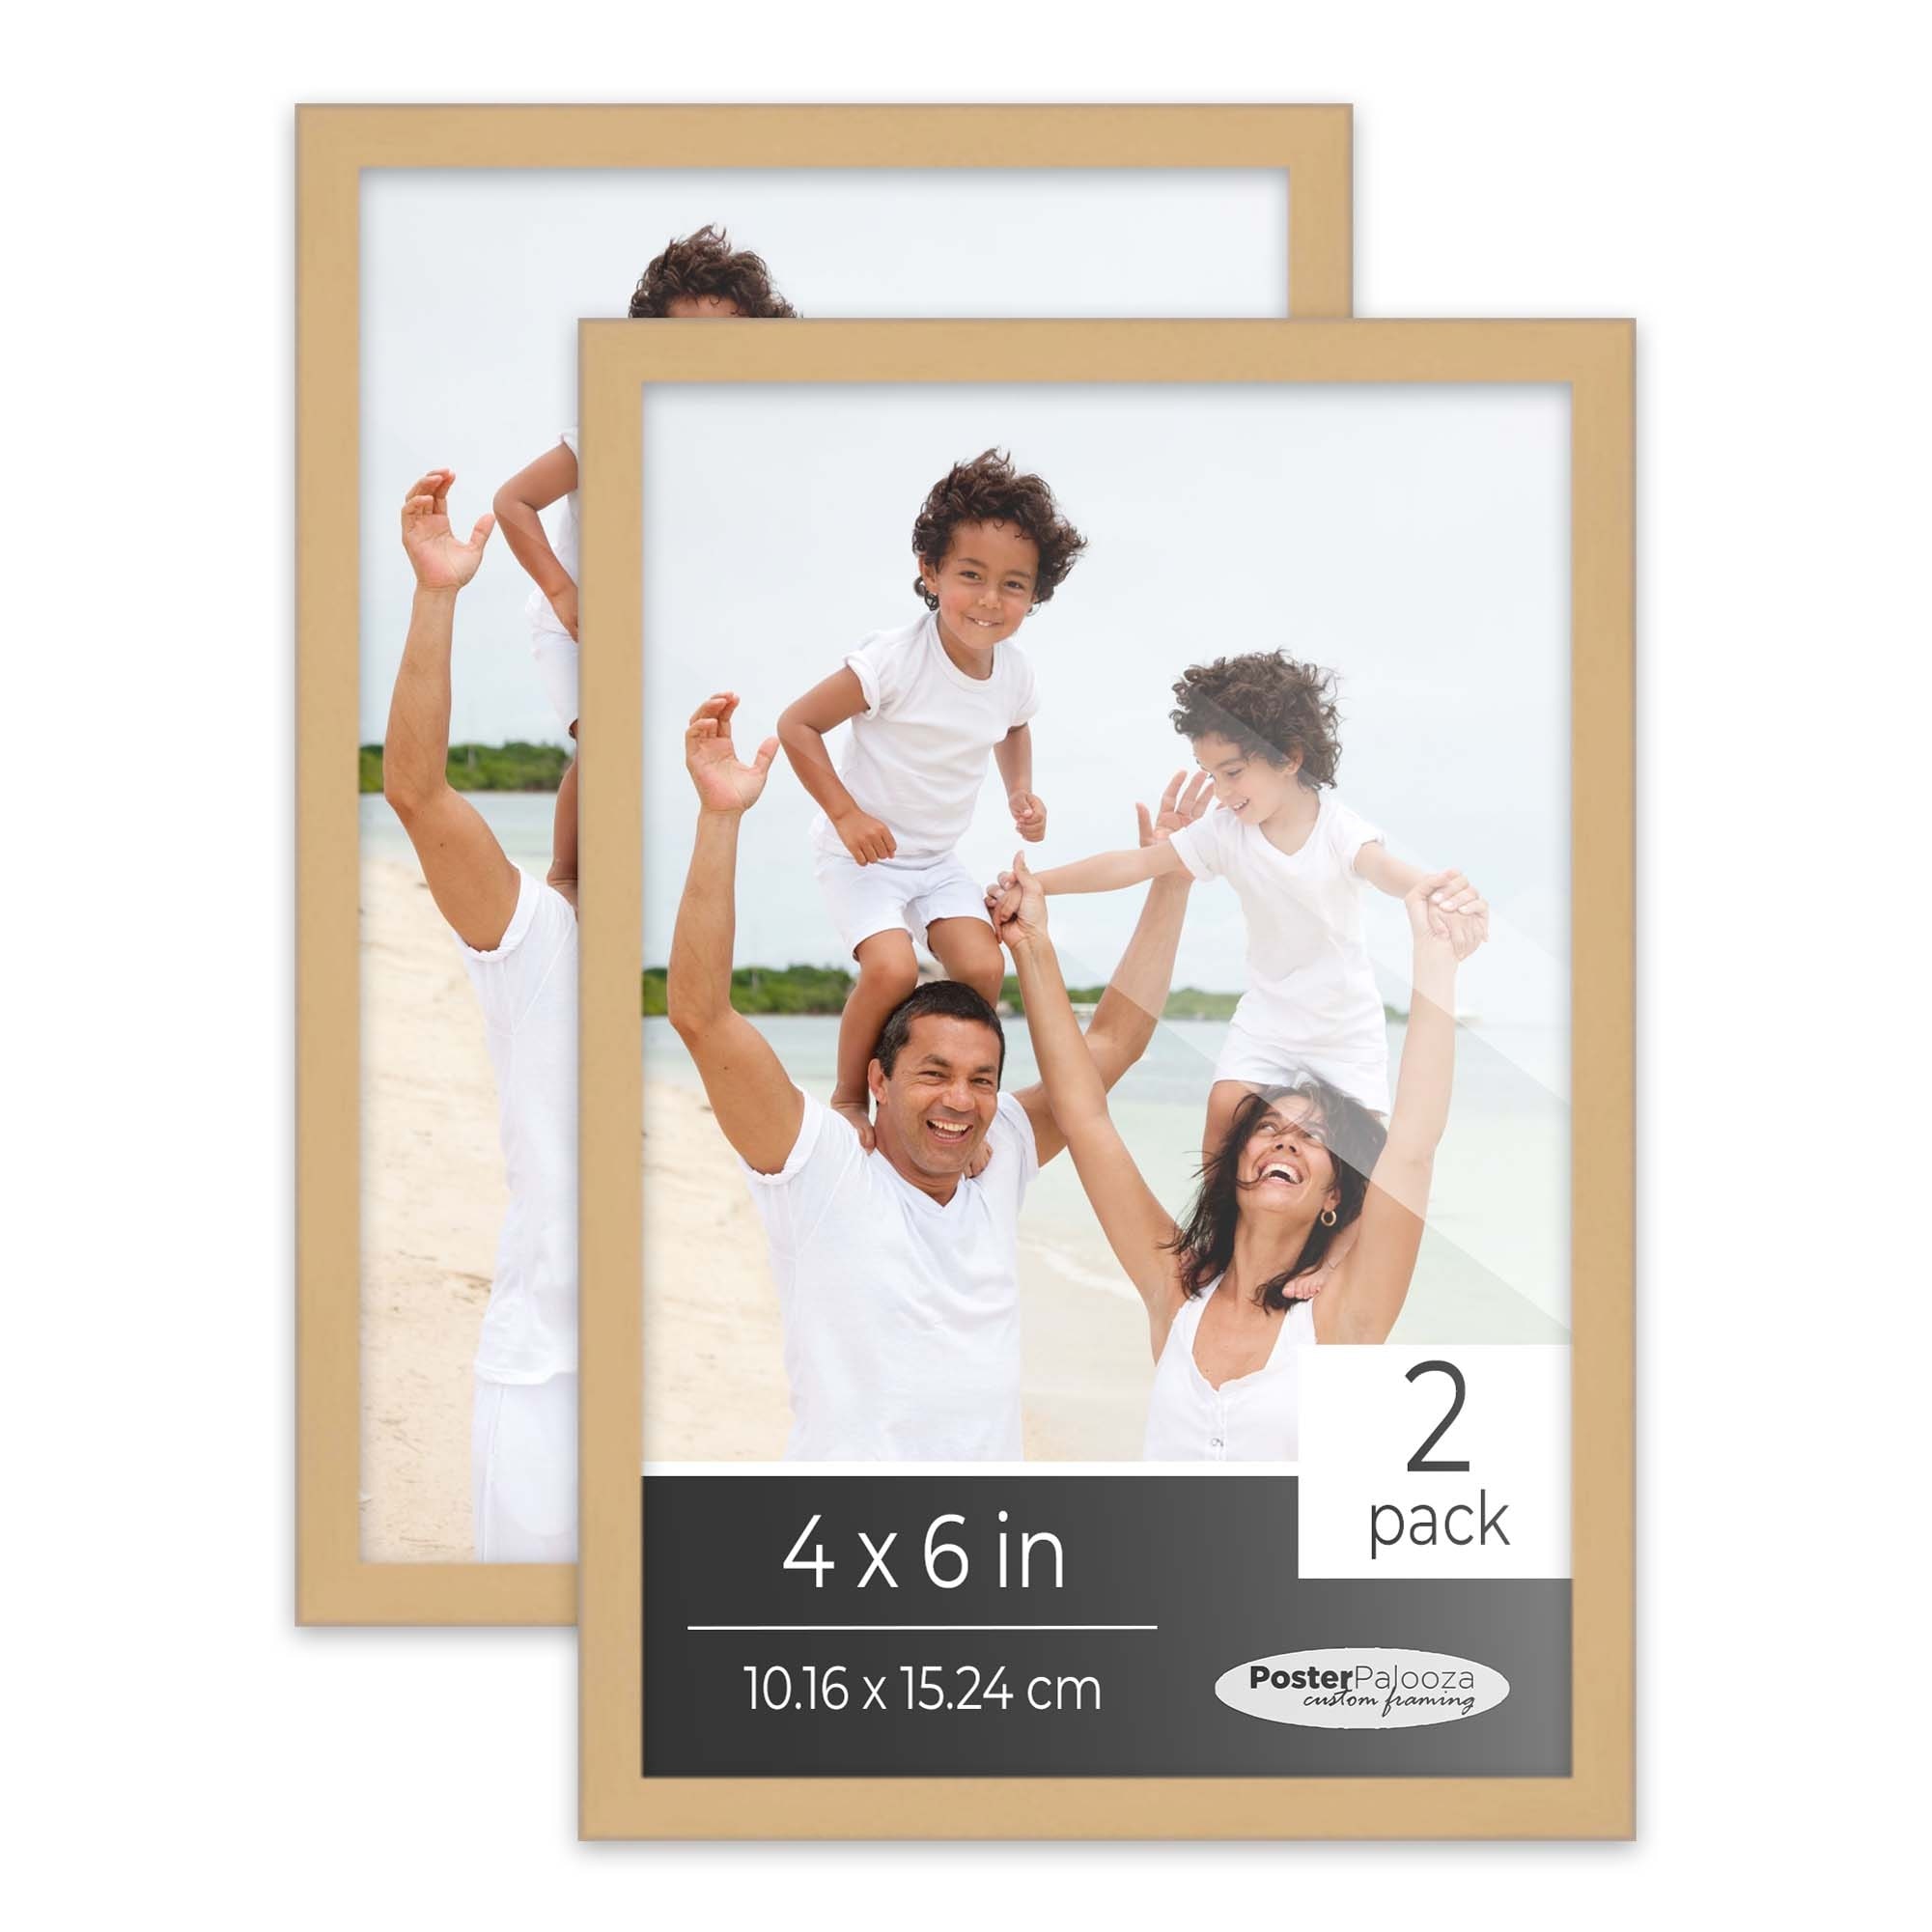 https://ak1.ostkcdn.com/images/products/is/images/direct/9cd5a5218db05c99f9f399885f7180fbbda745d2/4x6-Natural-Picture-Frame-Set-Pack-of-2-4x6-Wood-Picture-Frames-for-Gallery-Wall-2-4x6-Natural-Frames.jpg